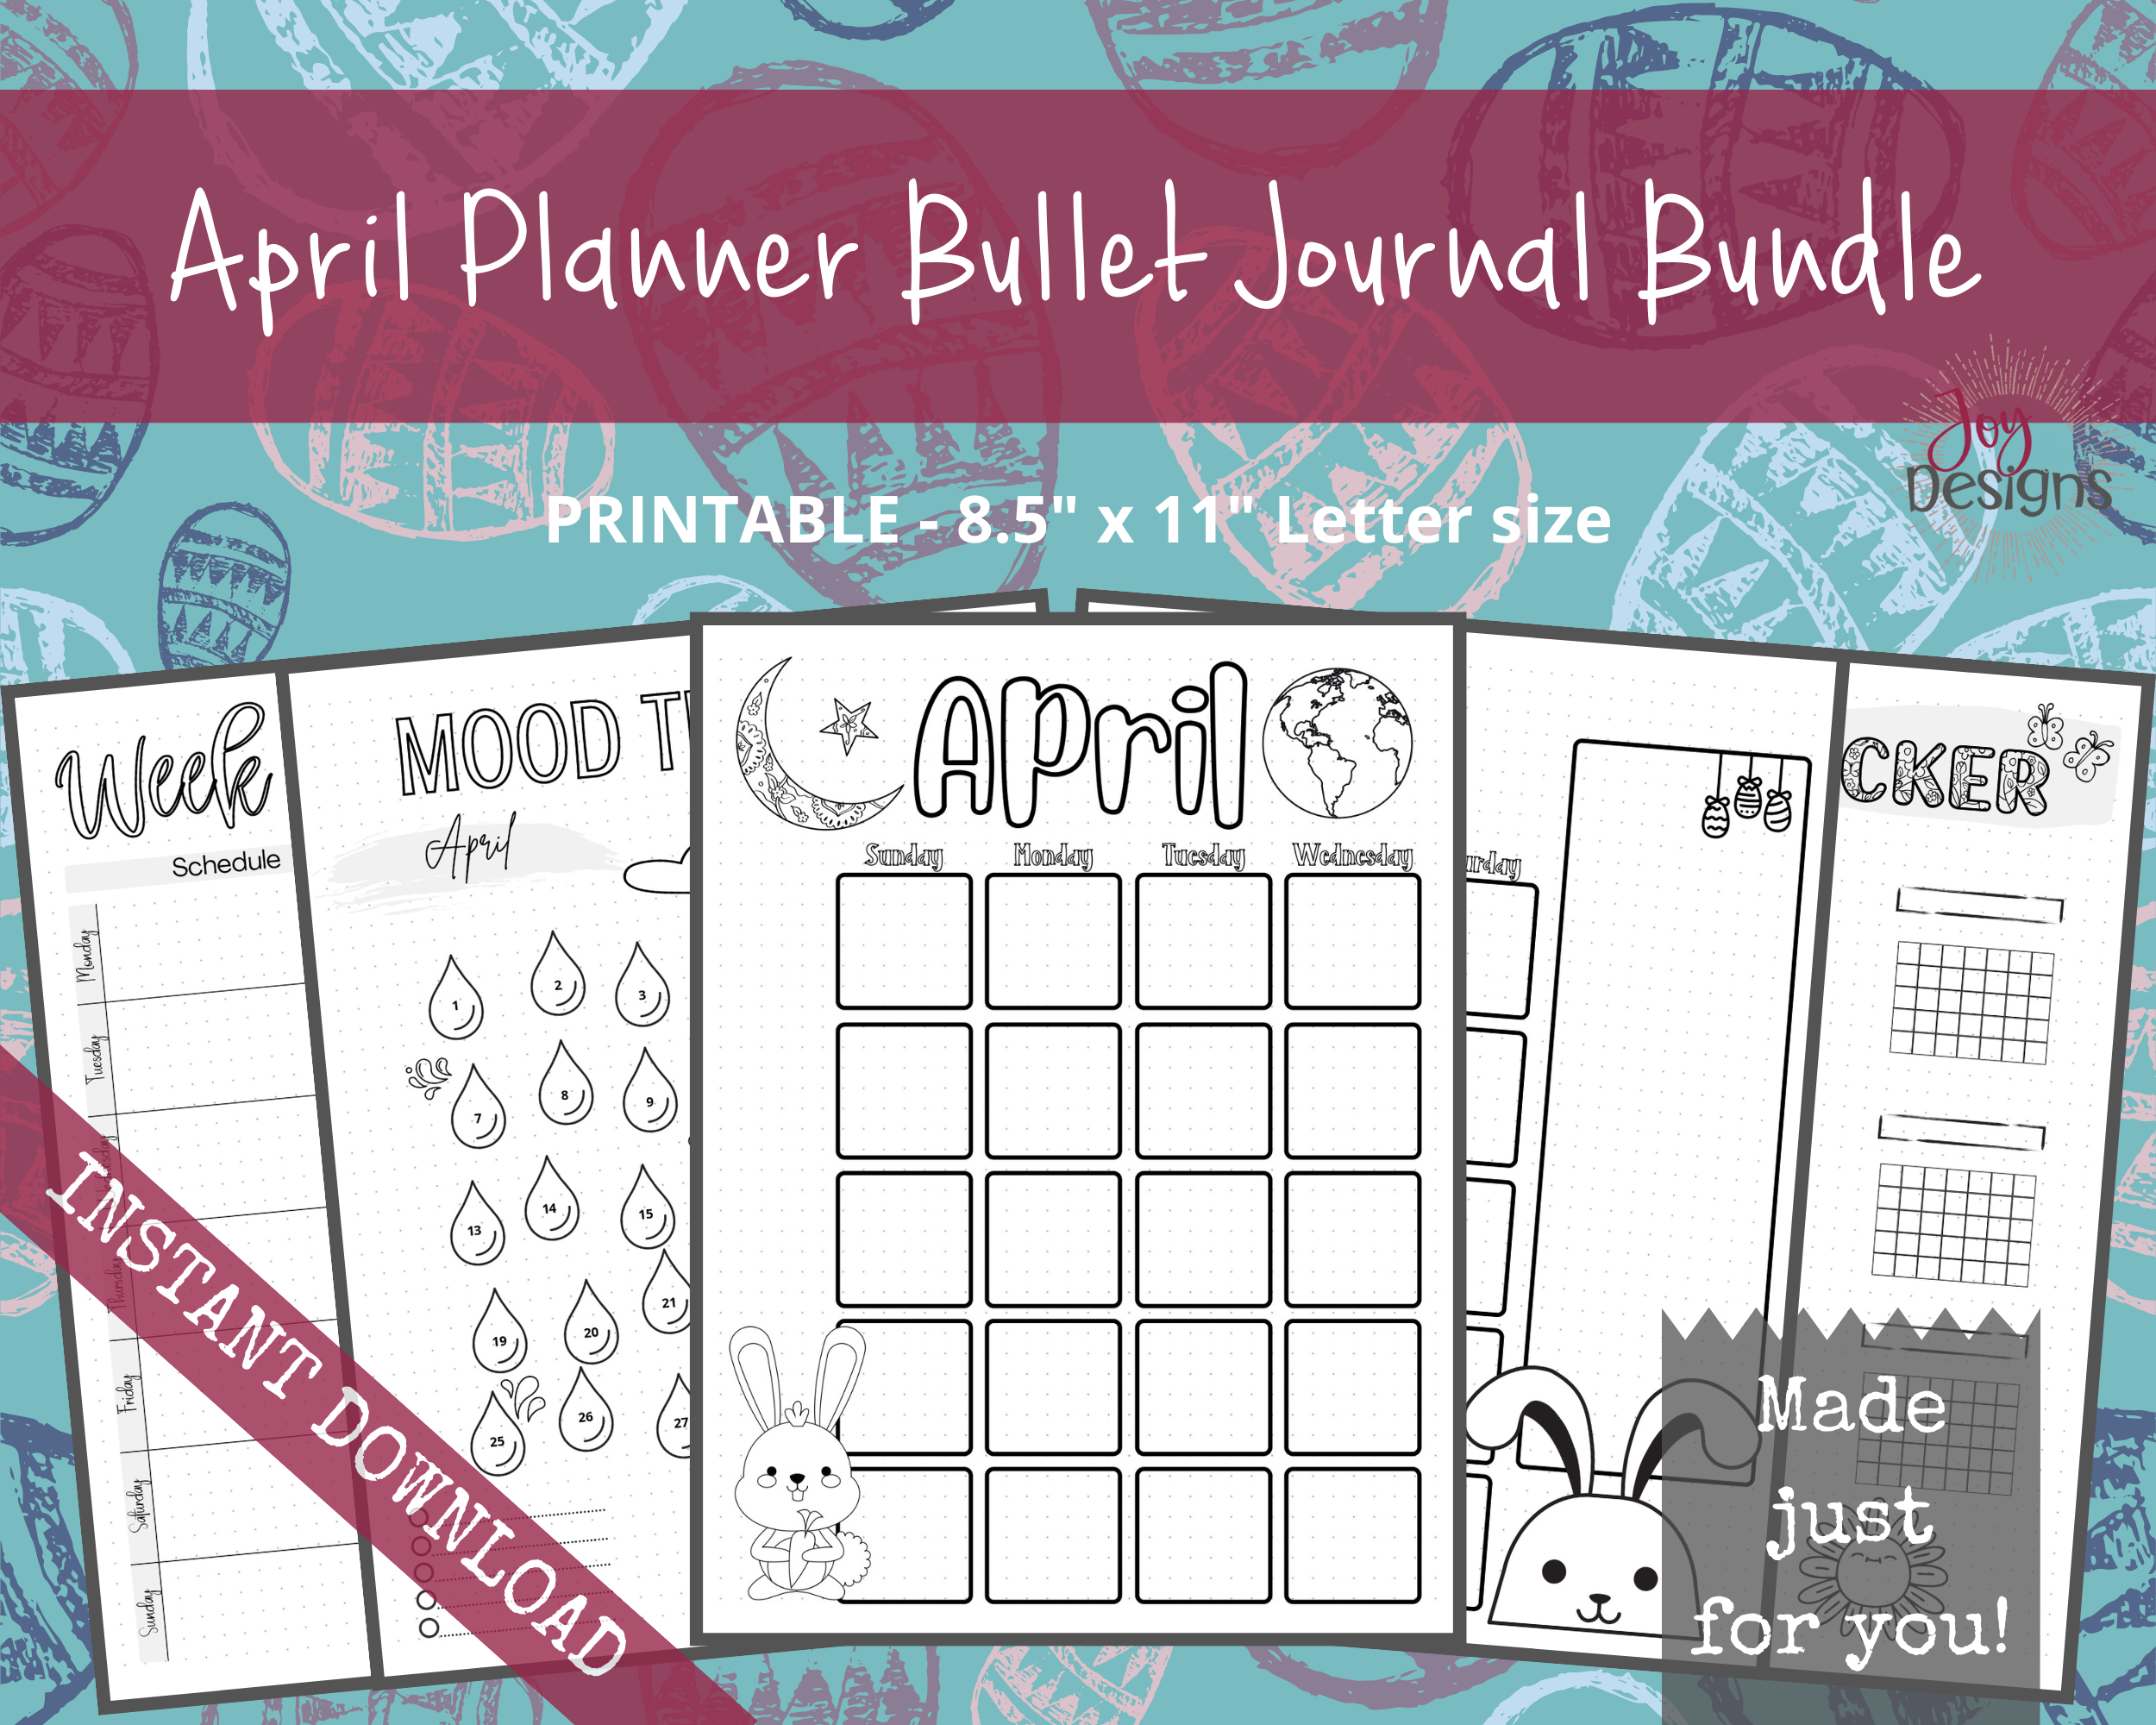 PreMade Bullet Journal Planner Pages | Instant Download Printable Planner |  Weekly Bujo Inserts Template PDF 2 Sizes | 280+ Pages